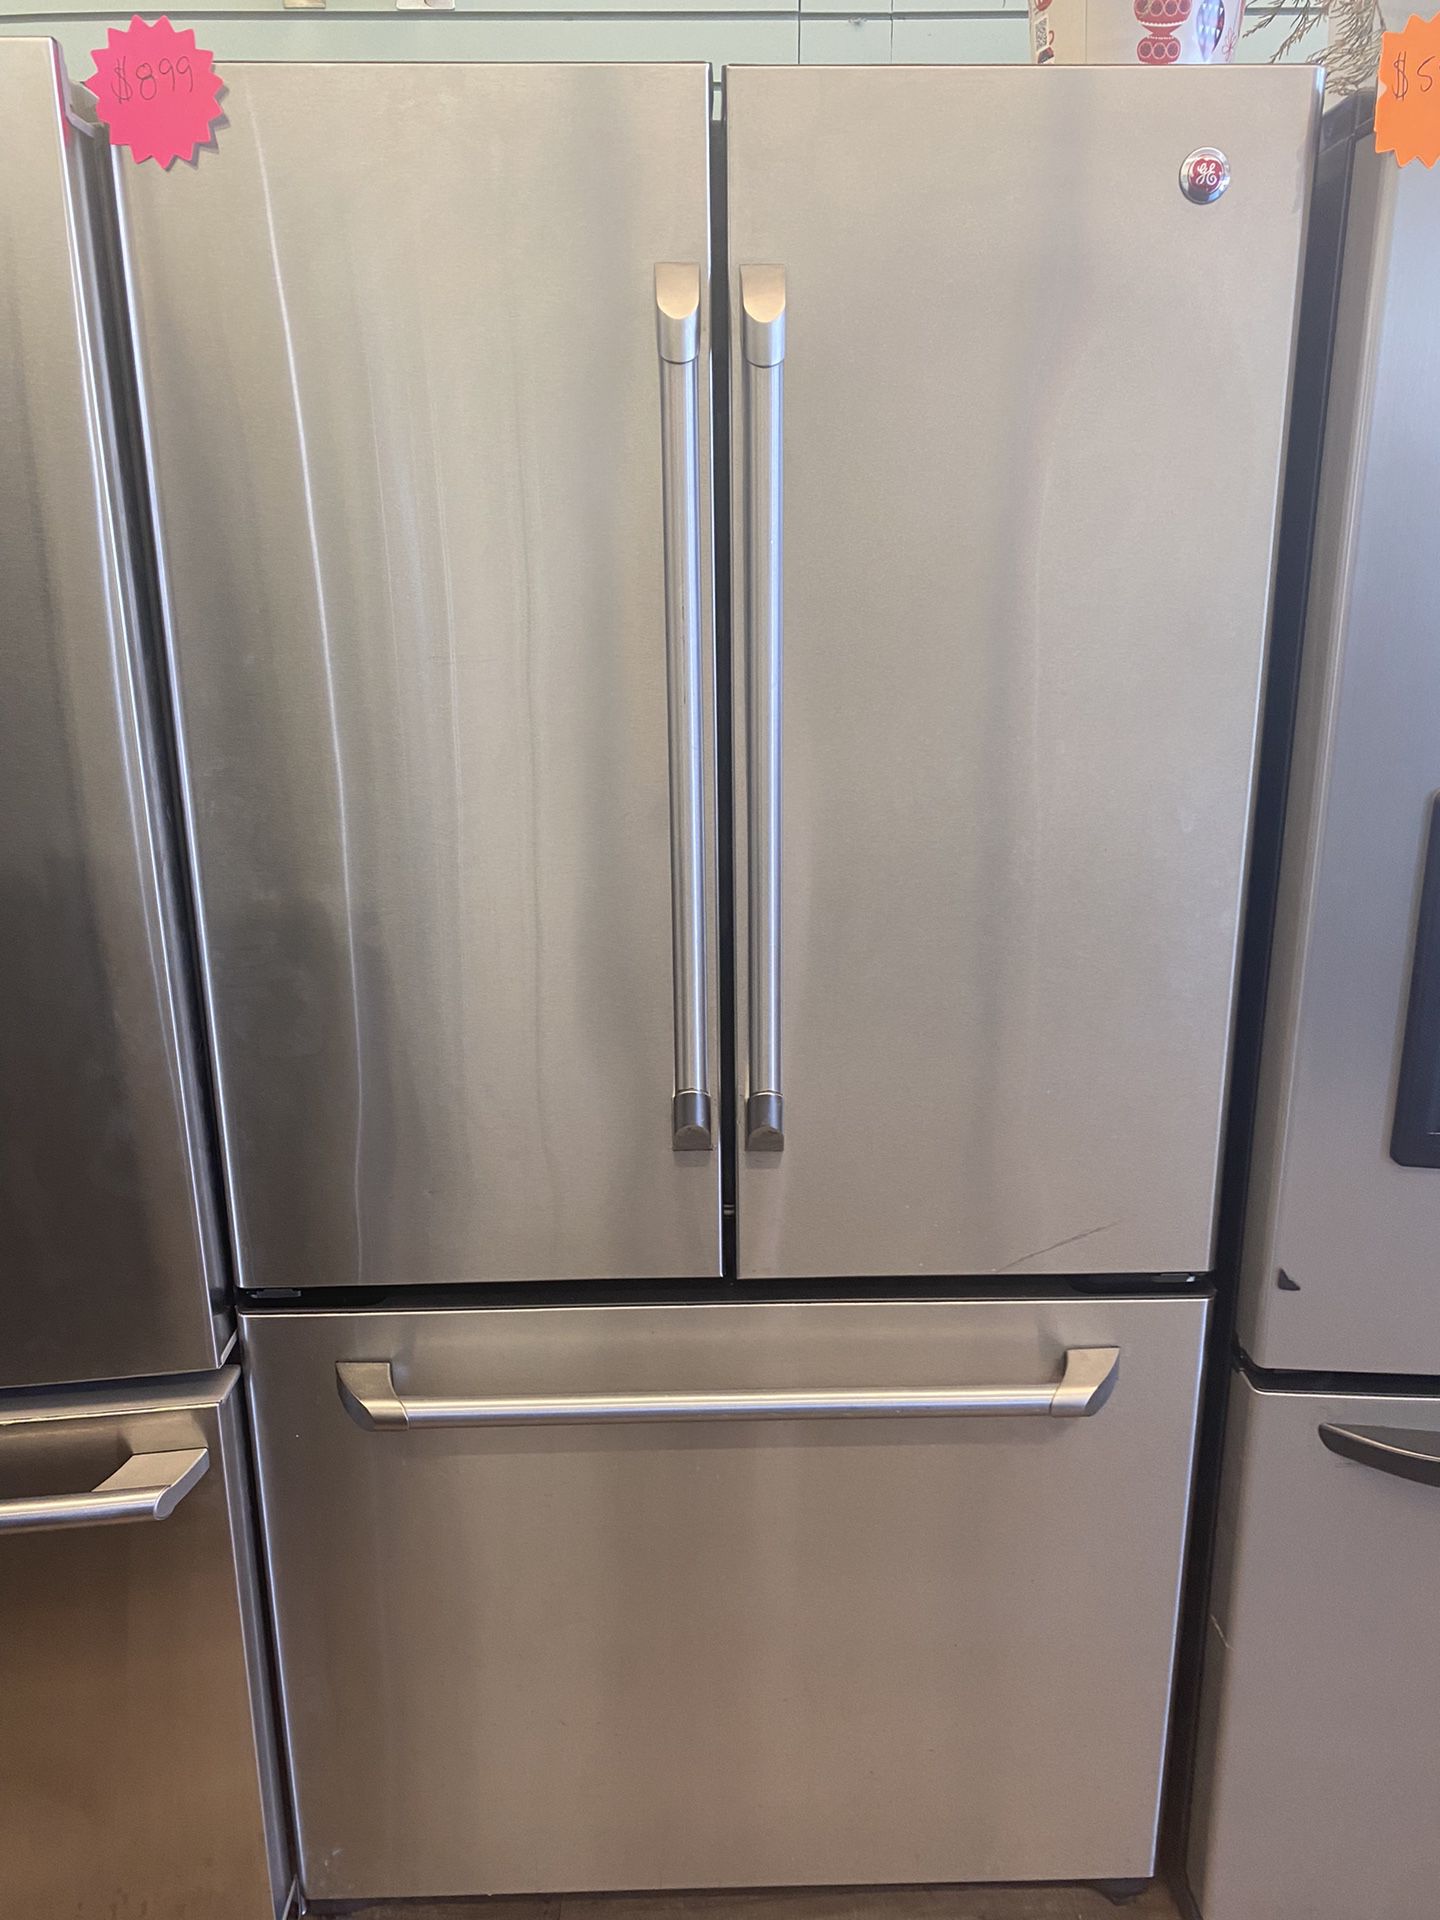 GE CAFE REFRIGERATOR $450 Delivery available for small fee🚛